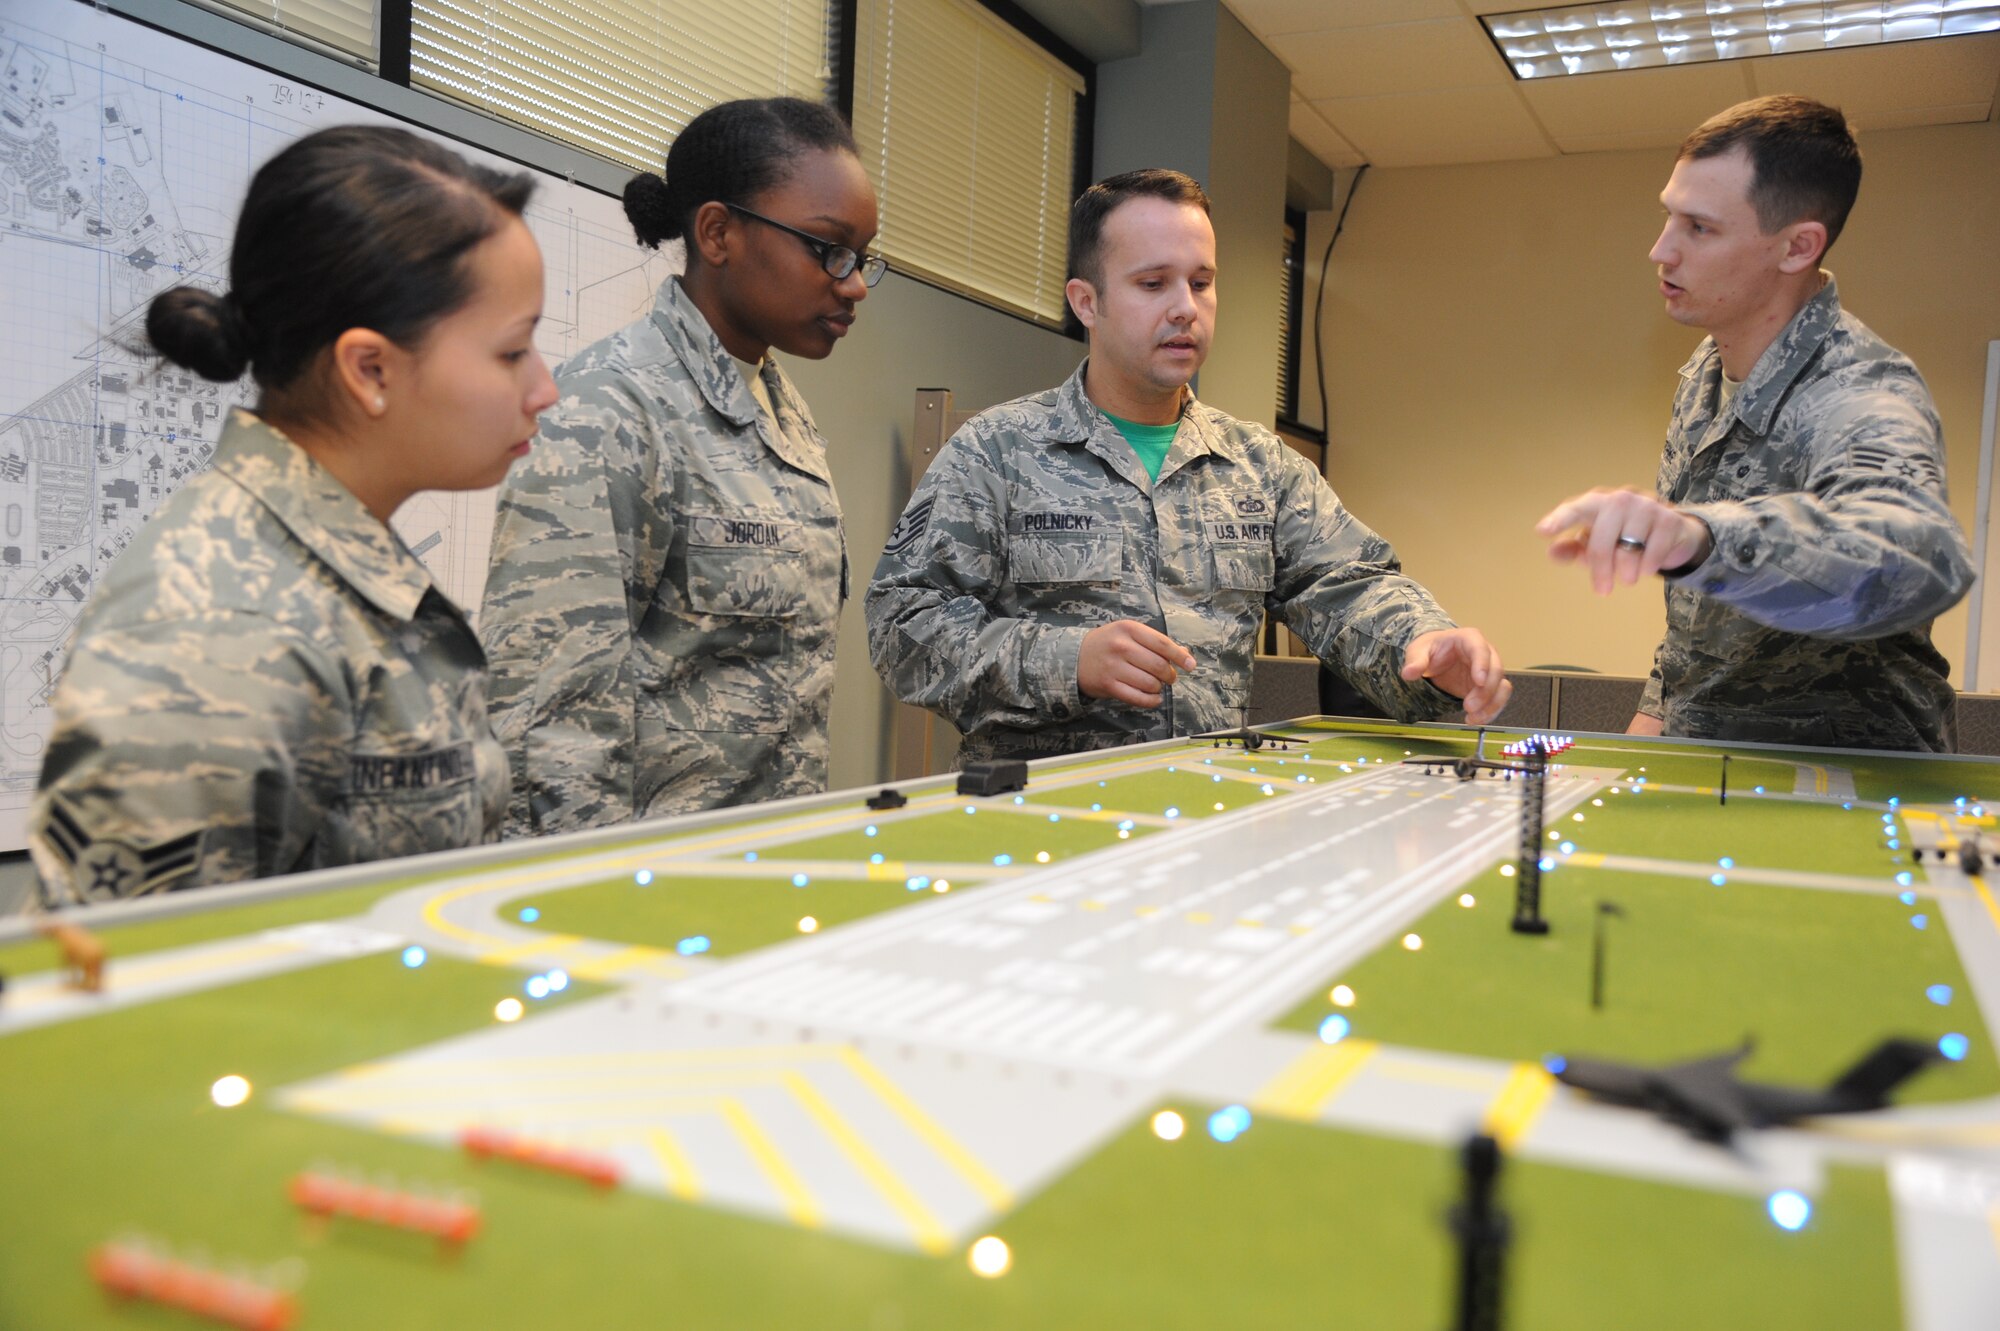 Airman 1st Class Kathryn Infantino and Airman Basic Marquise Jordan, 334th Training Squadron students, stand by while Staff Sgt. Courtney Polnicky, 334th TRS airfield management instructor, and Senior Airman Ryan Rathke, 334th TRS student, discuss the training capabilities the new model airfield training aid table offers Dec. 12, 2014, at Cody Hall, Keesler Air Force Base, Miss.  Utilizing the model, which is a scaled representation of an airfield, will increase understanding, productivity and efficiency in the classroom.  (U.S. Air Force photo by Kemberly Groue)